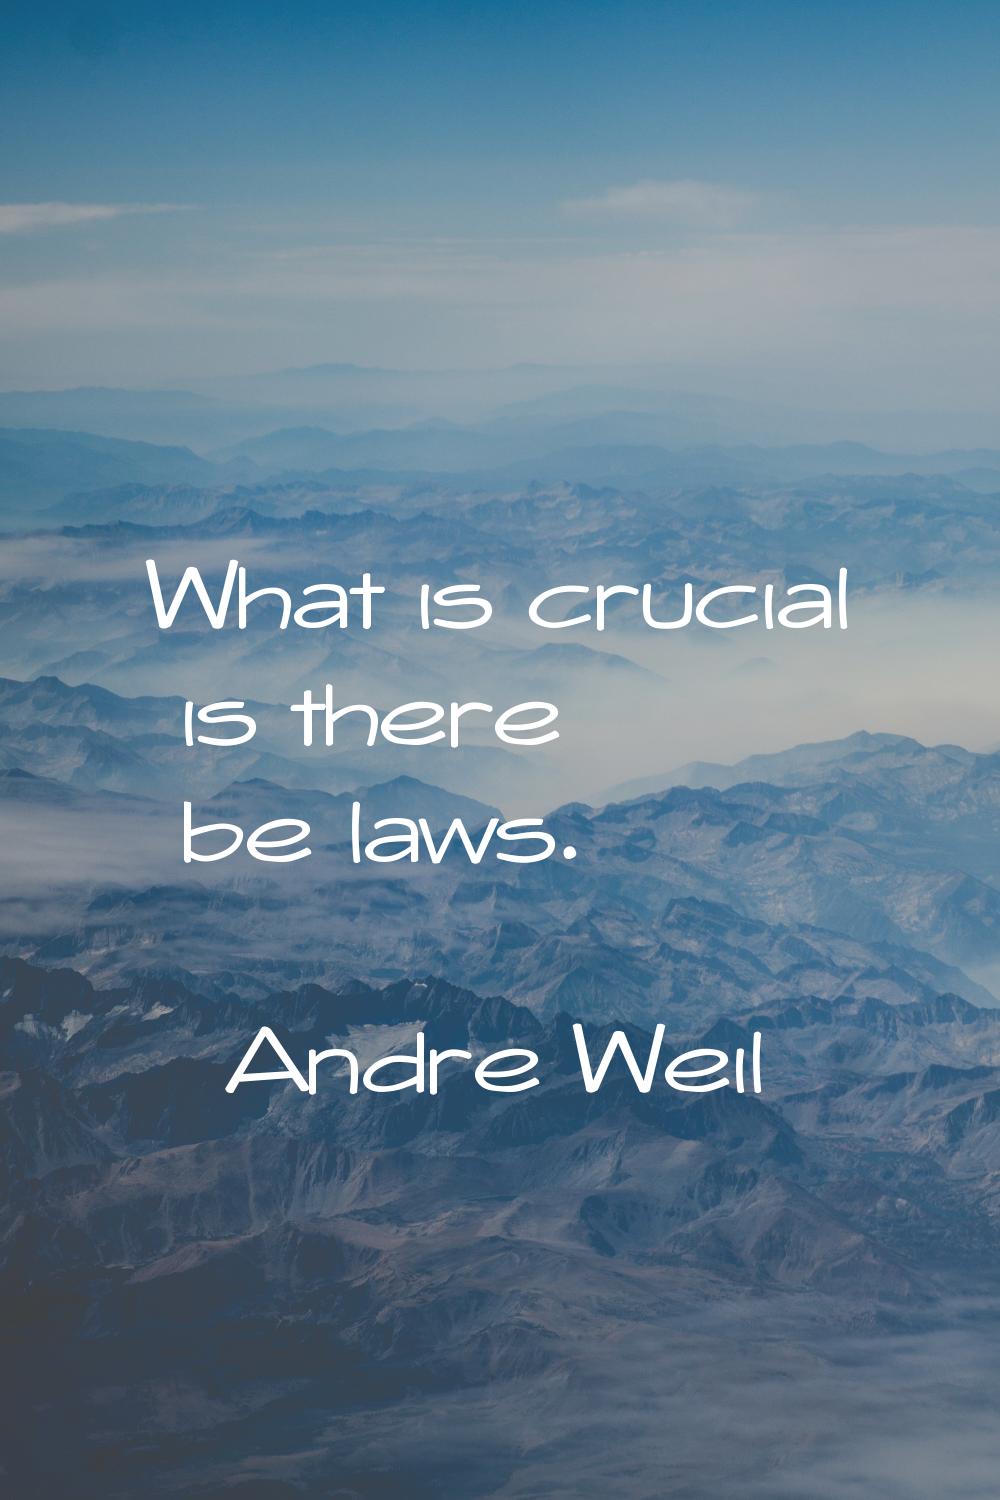 What is crucial is there be laws.